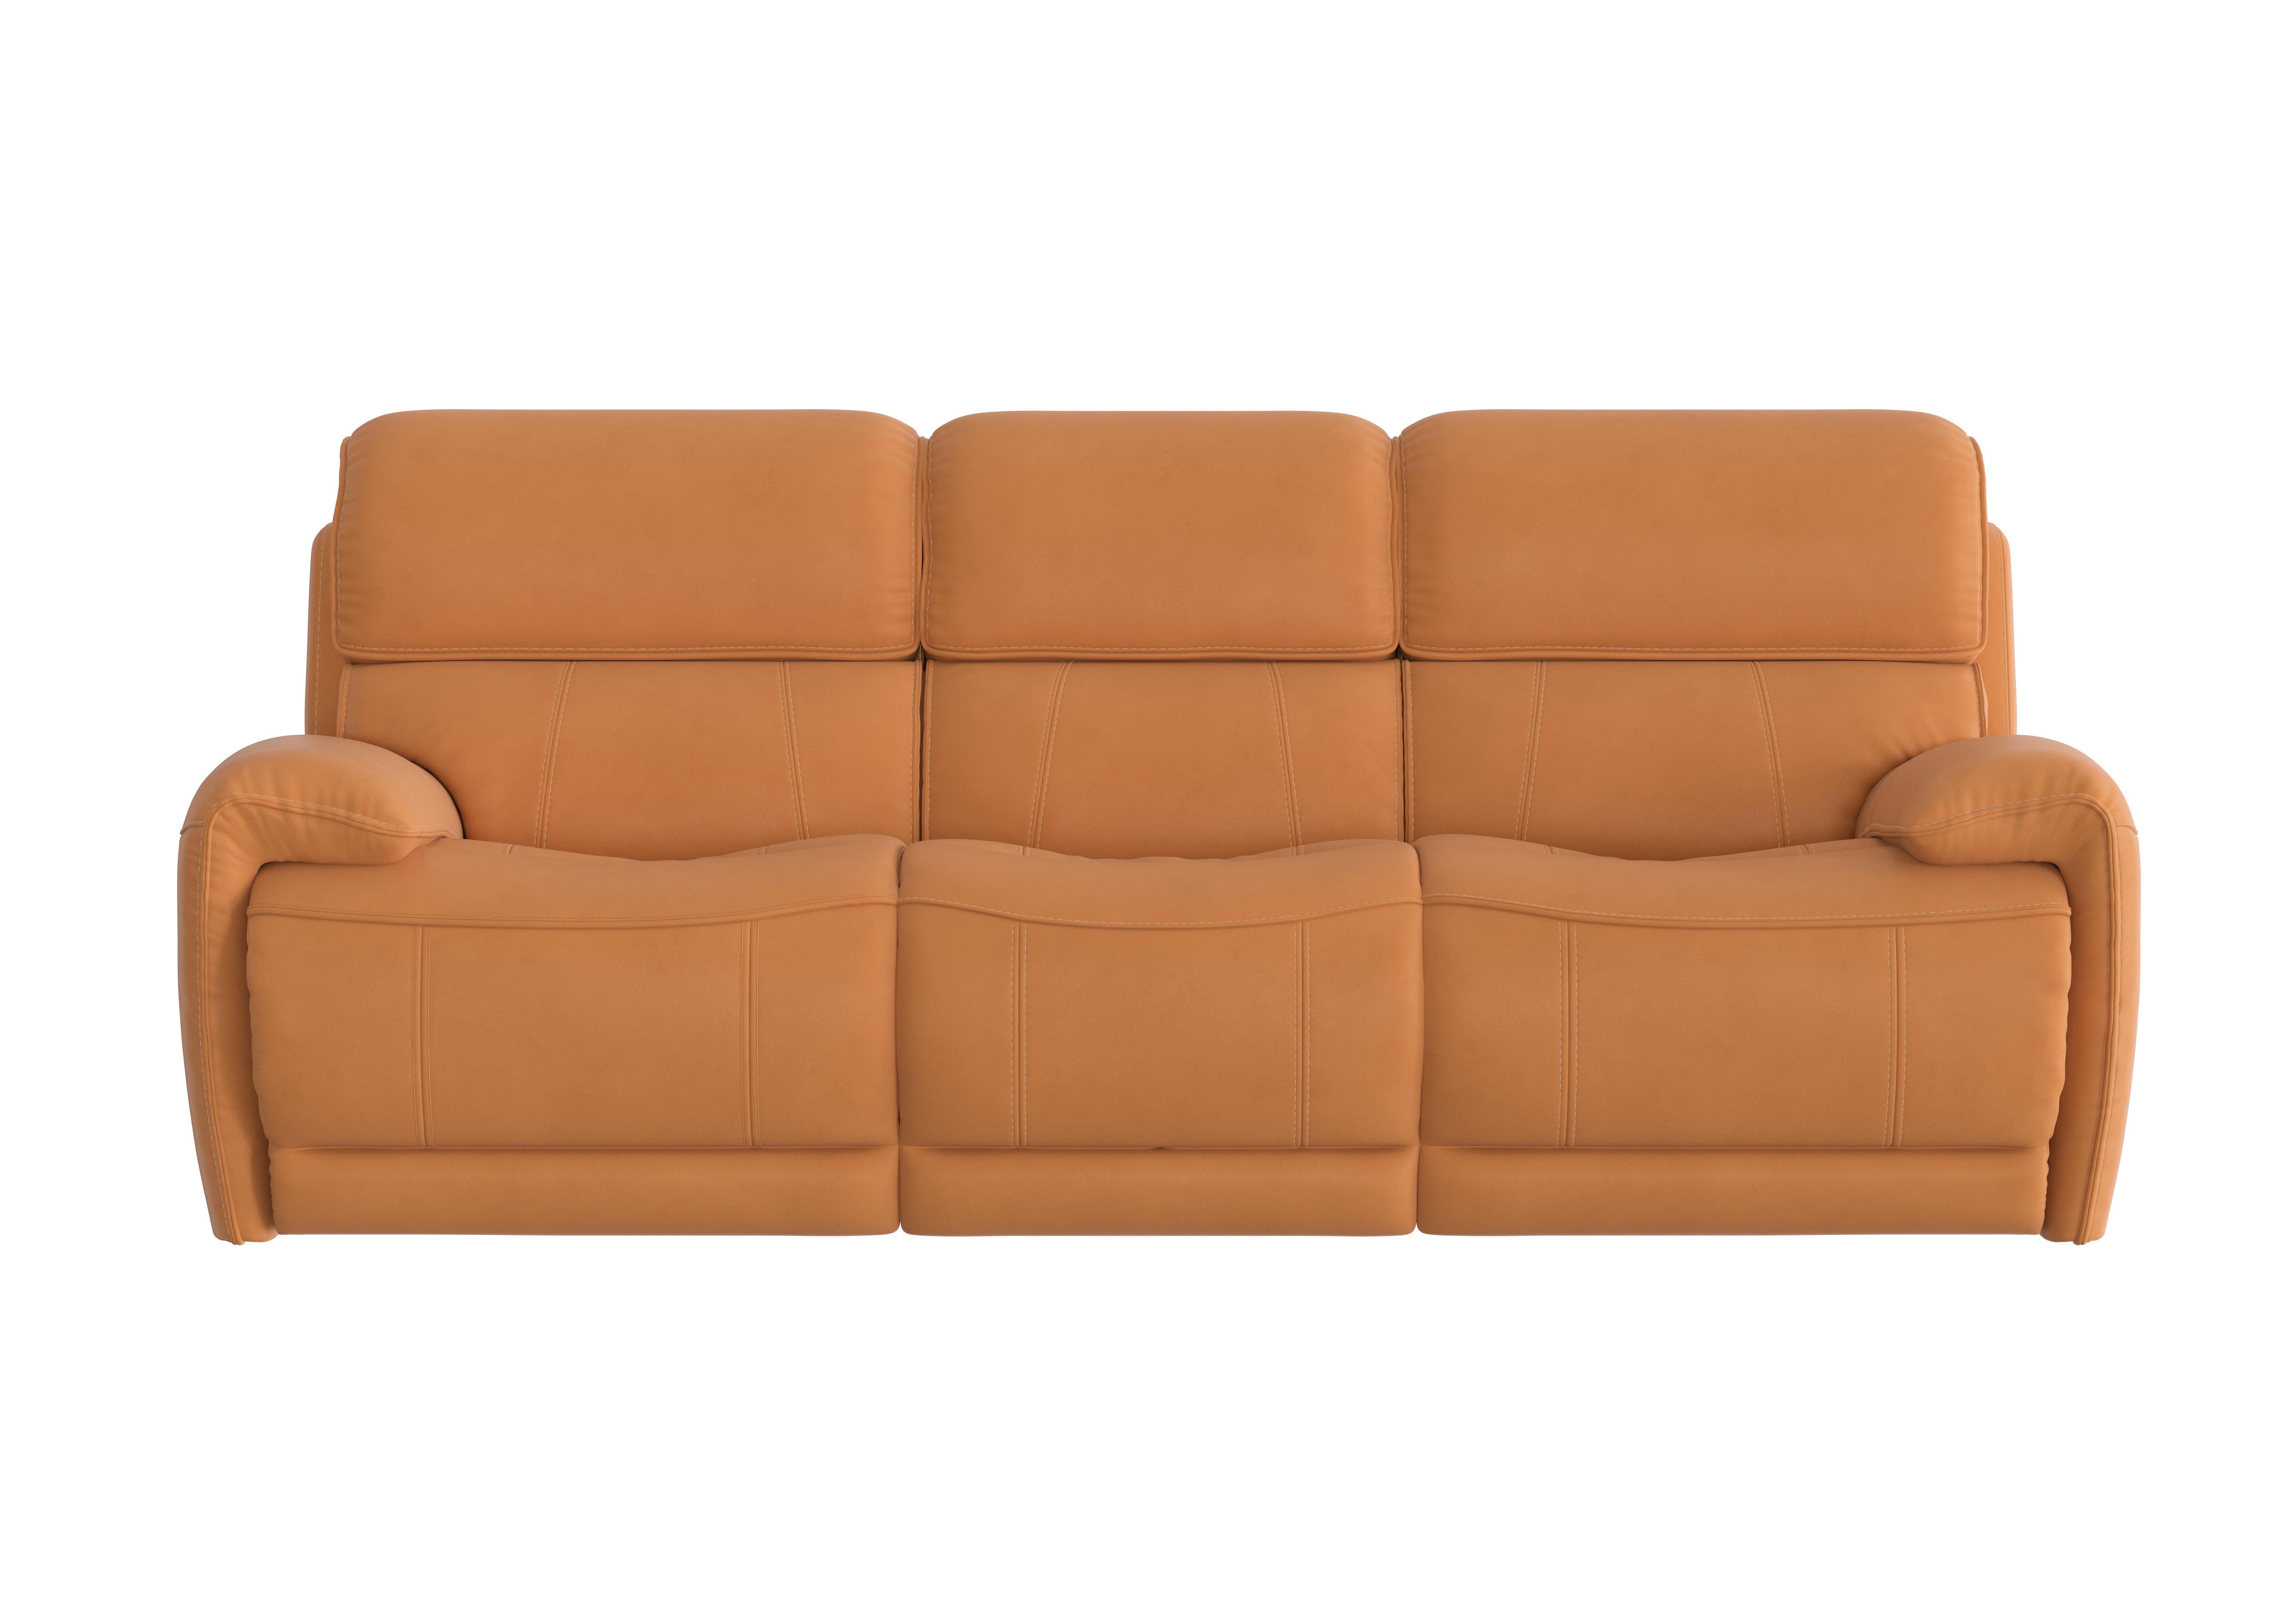 Link 3 Seater Leather Power Recliner Sofa with Power Headrests in Bv-335e Honey Yellow on Furniture Village